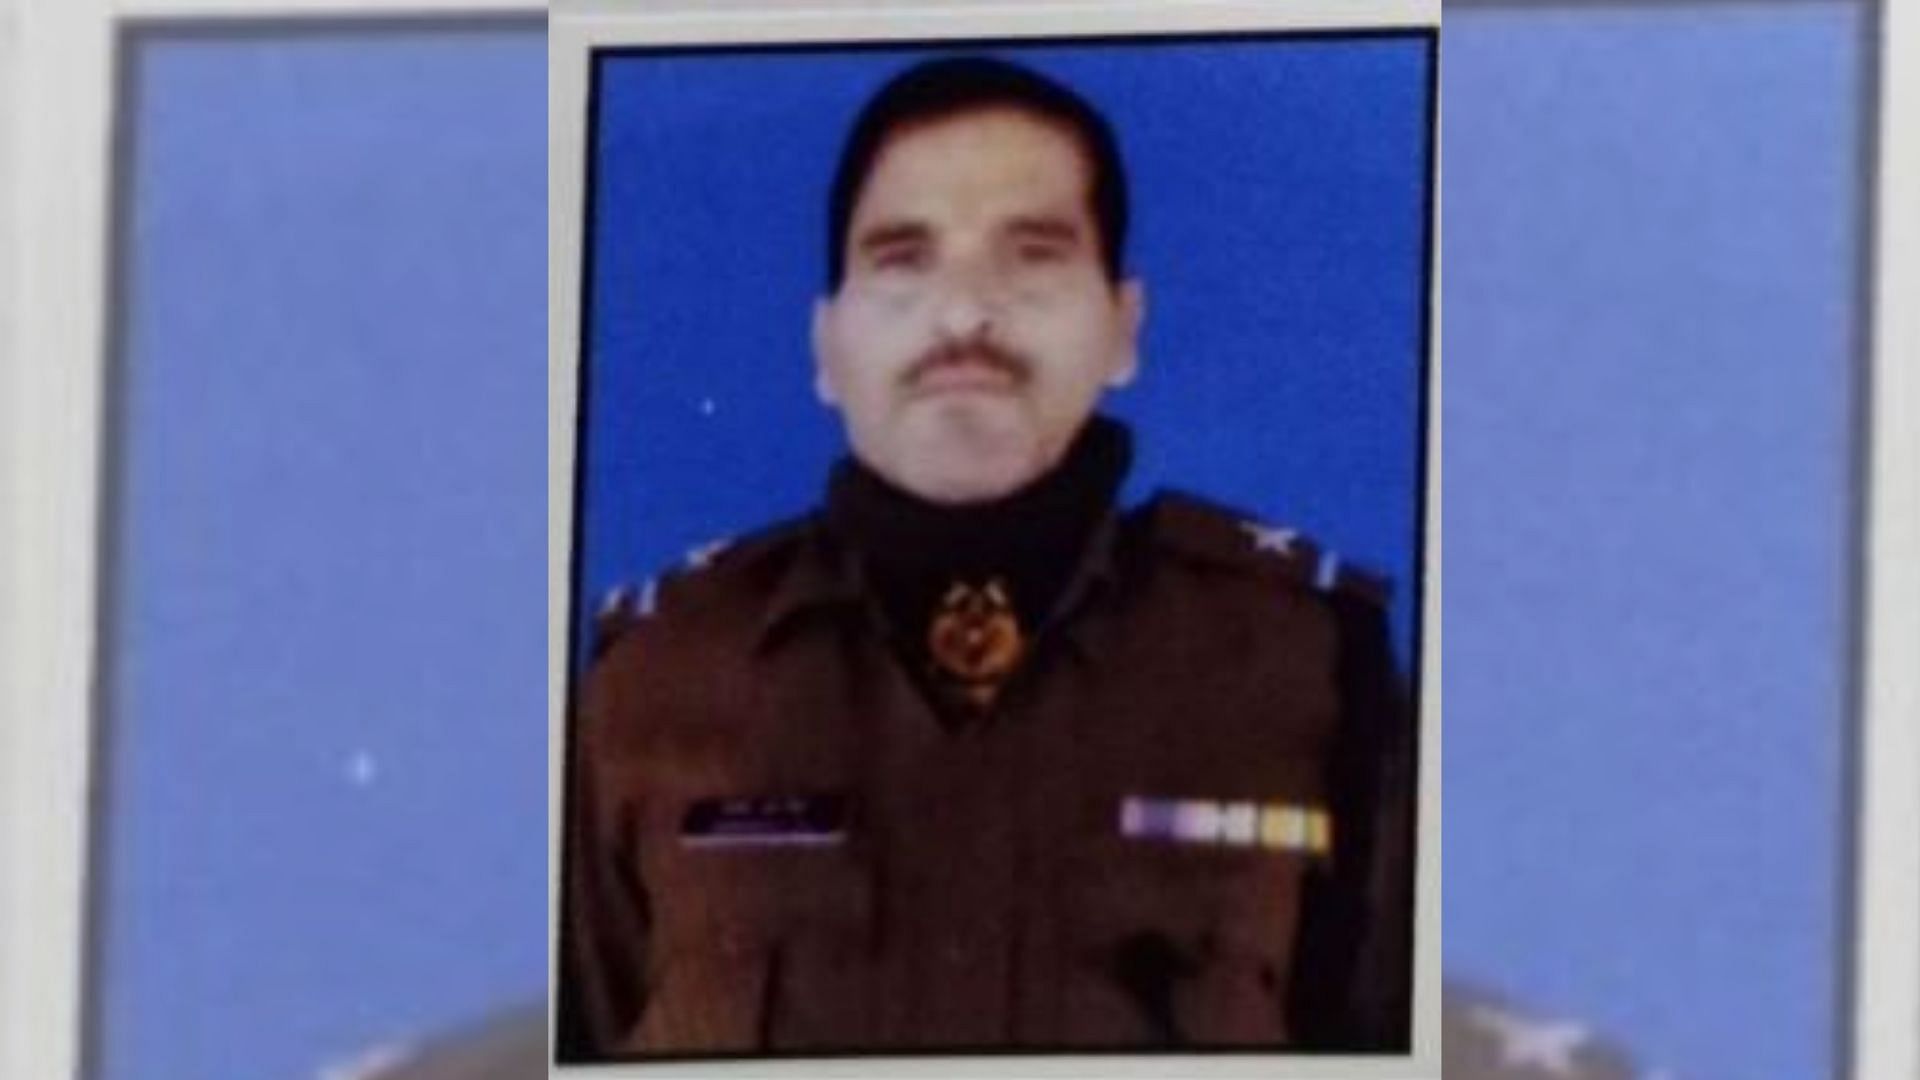 Assistant Sub Inspector in CRPF, Mohan Lal, who died in the Pulwama terror attack, will be awarded the President’s Medal for Gallantry posthumously.